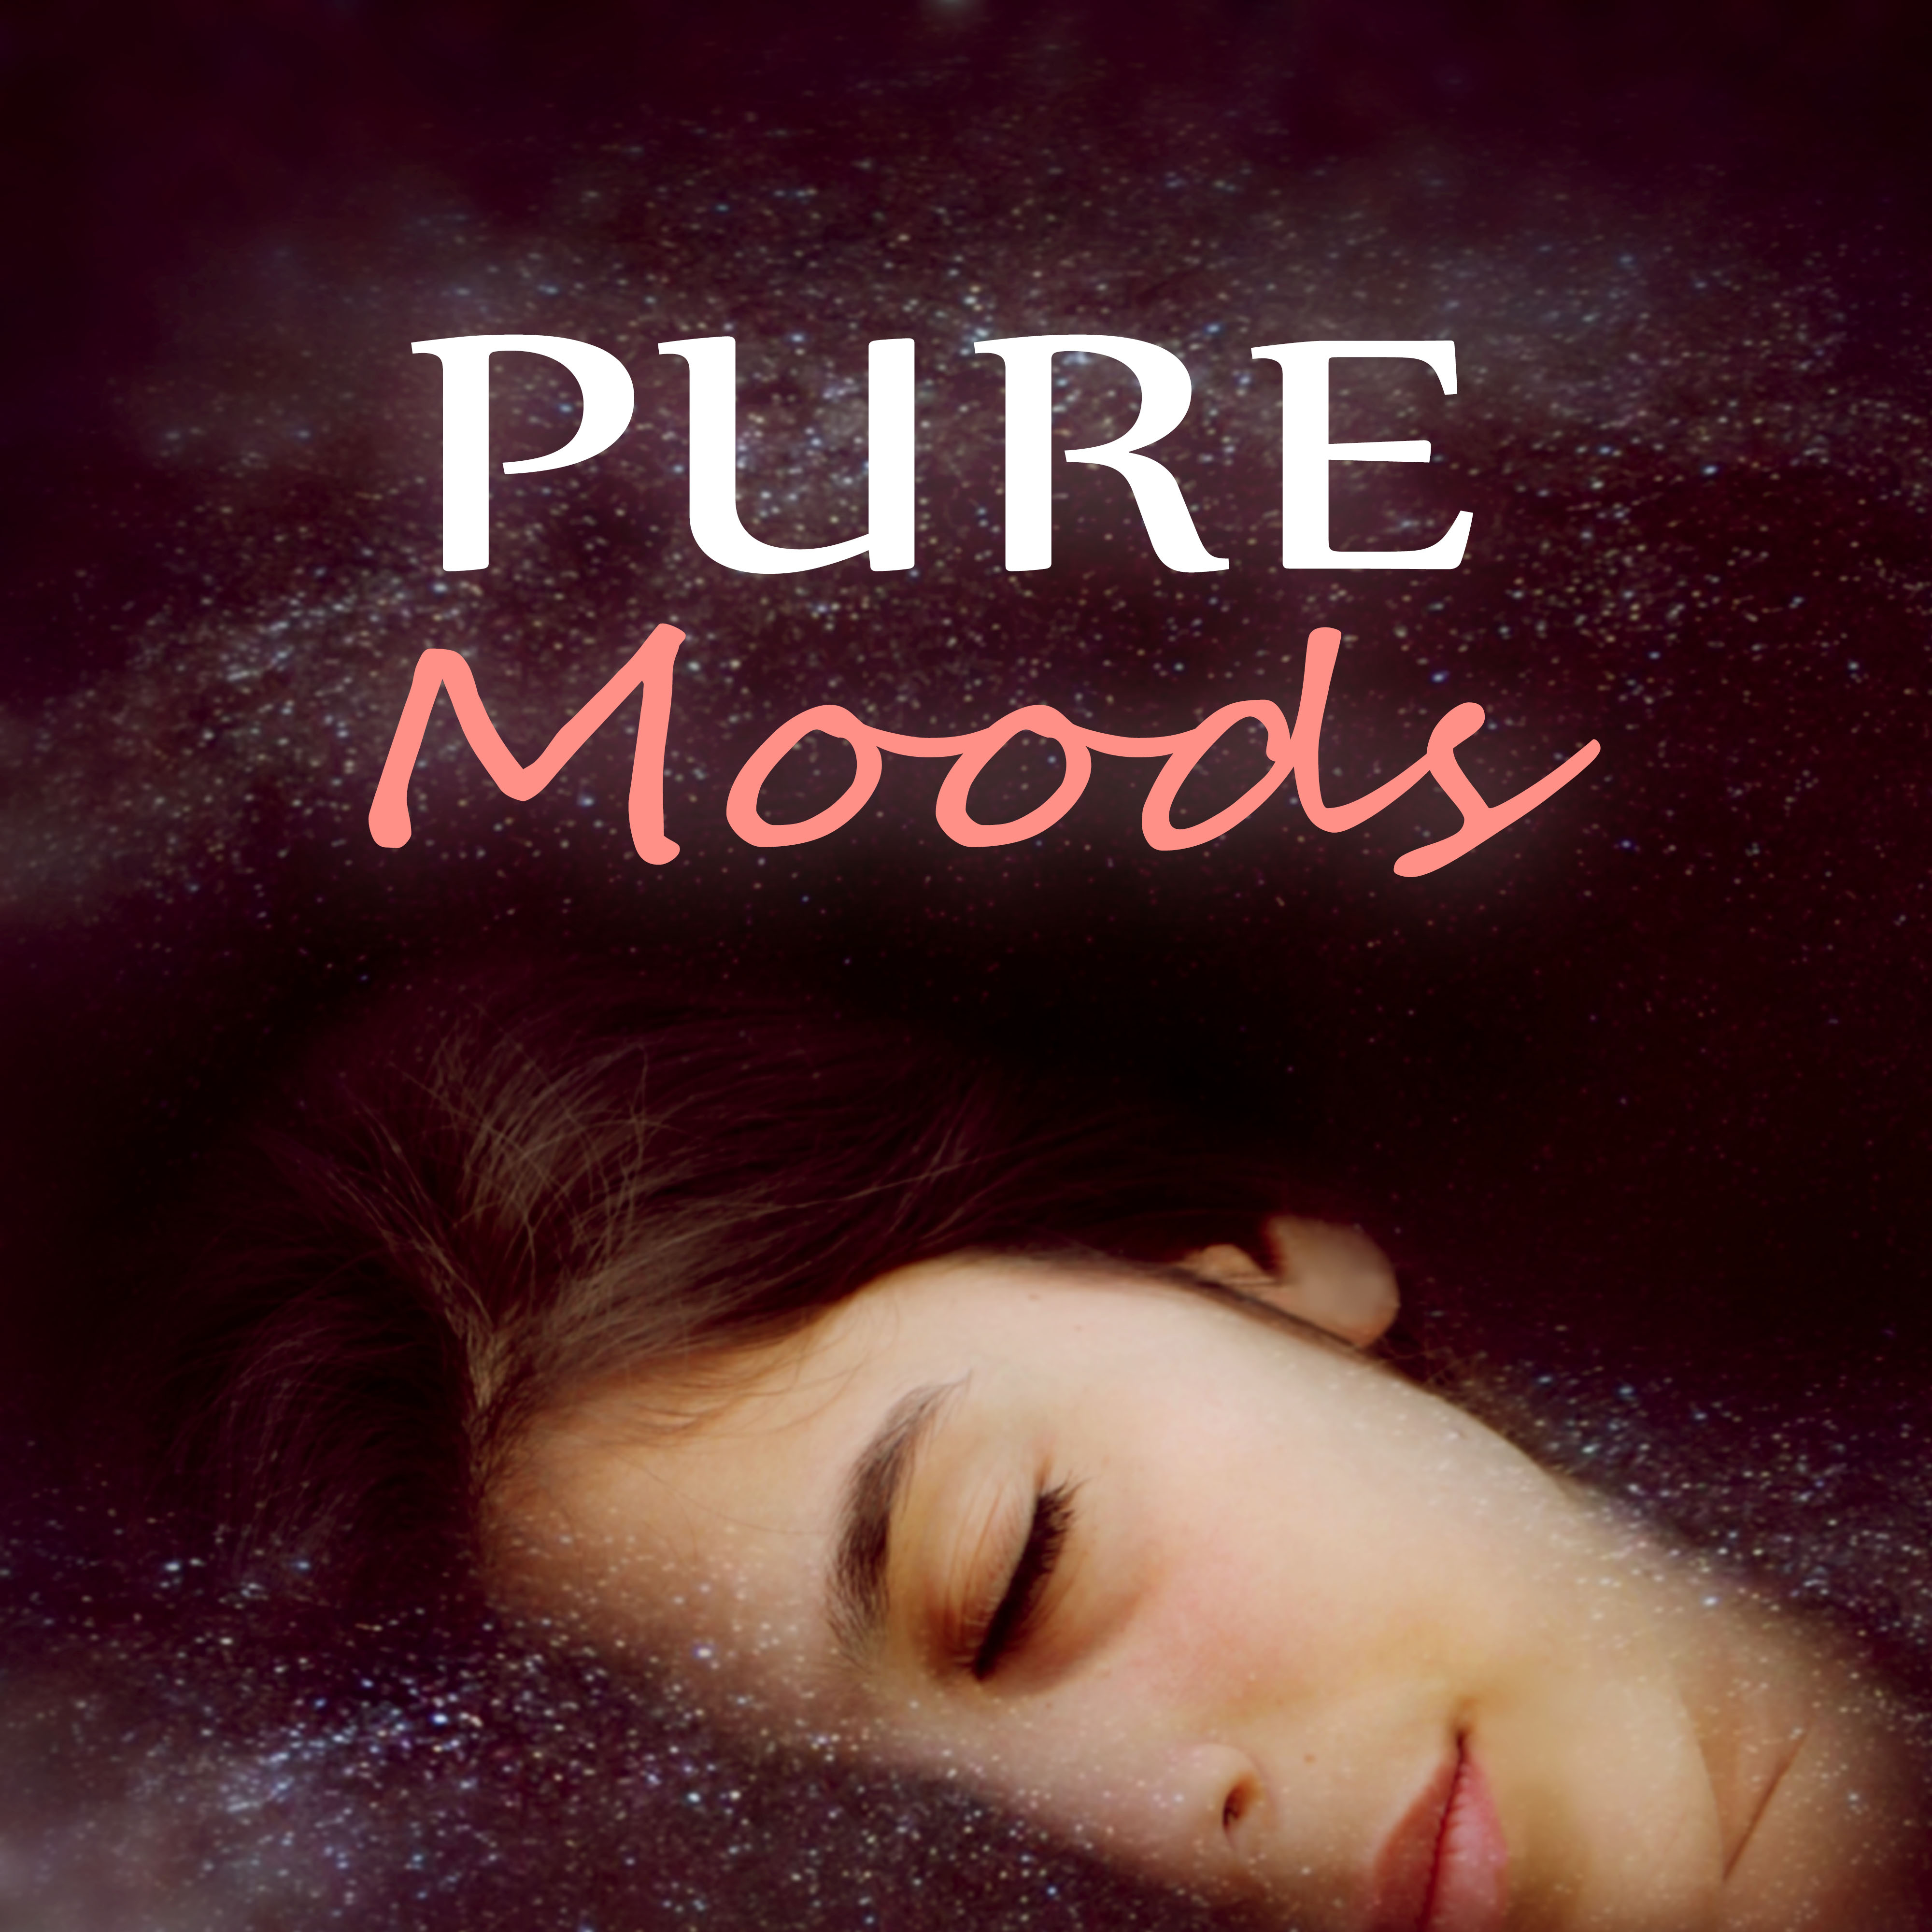 Pure Moods - Spa & Yoga, Chill Out Music, Dream Softly, Sound Therapy for Stress Relief, In Harmony with Nature Sounds